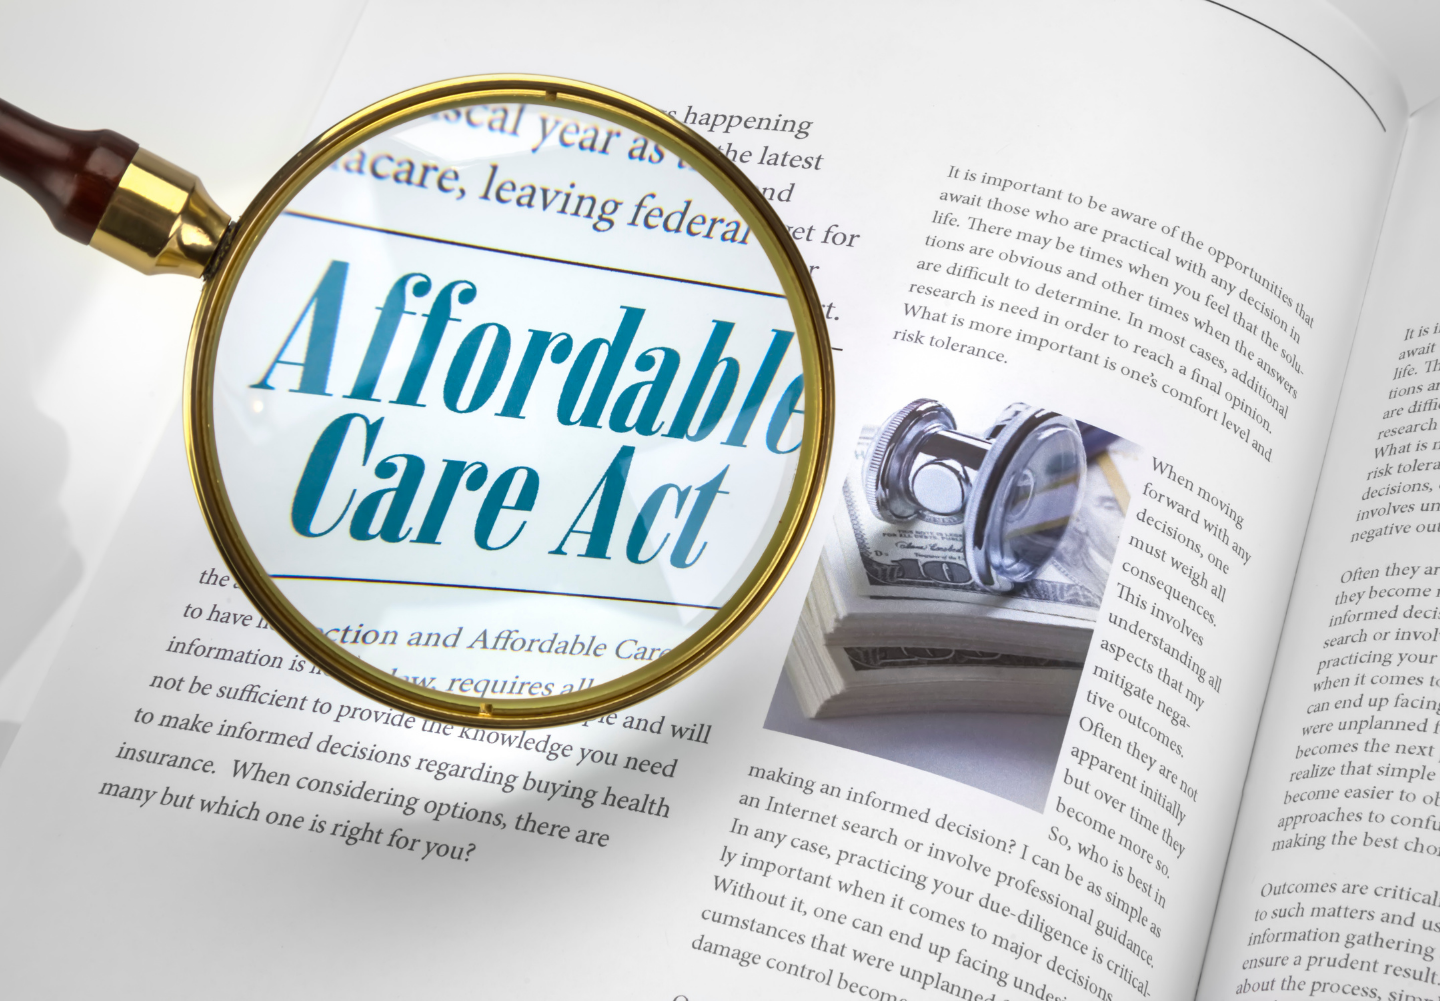 know about Section 1557 of the Affordable Care Act